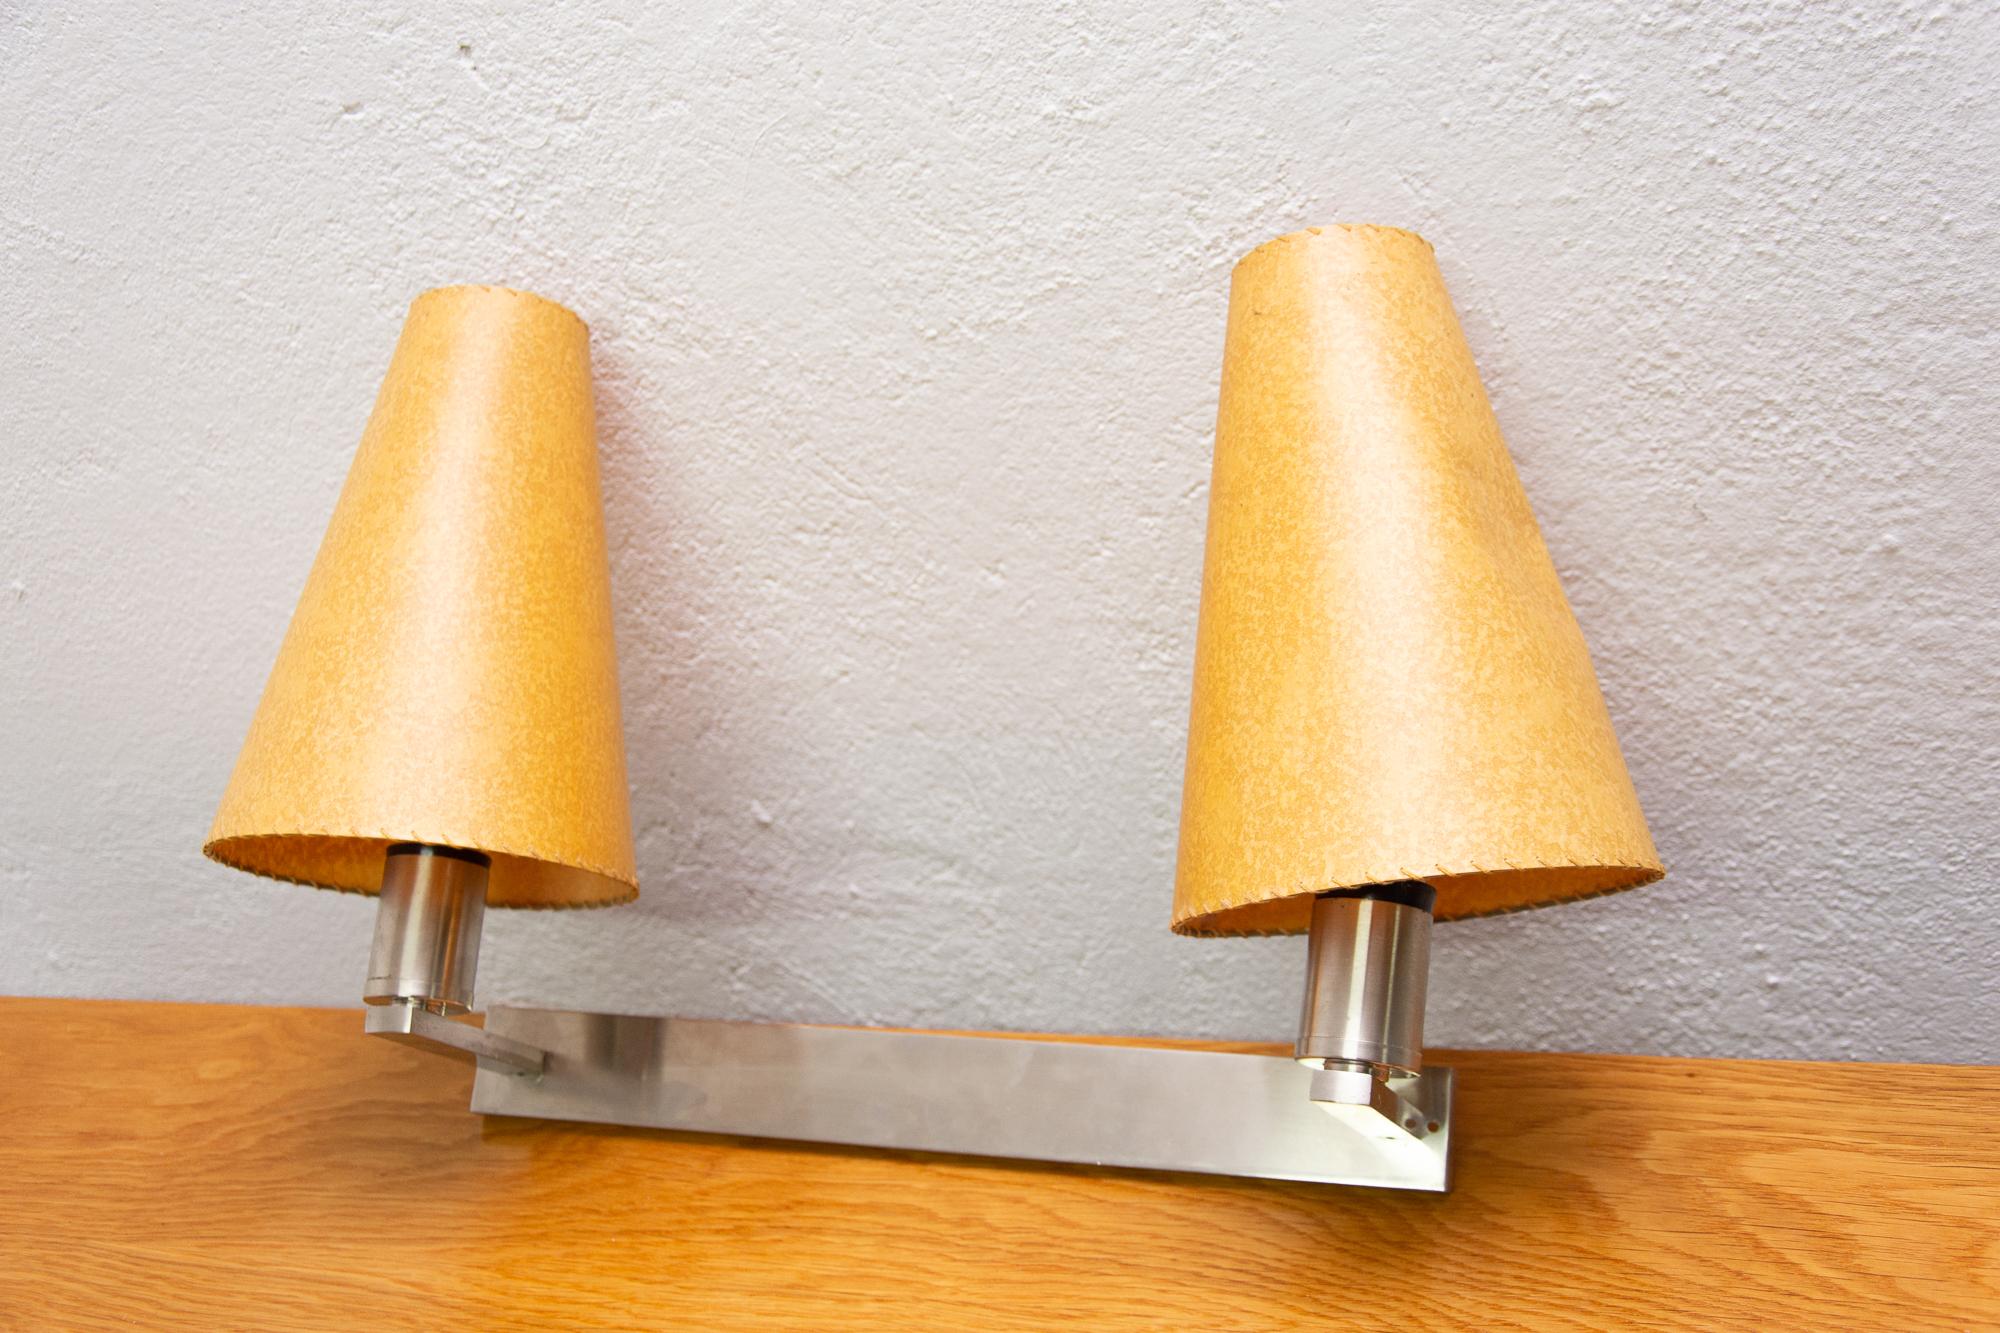 20th Century Bauhaus Chromed Wall Lamp with Two Lampshades by Vlastimil Brožek, Czechoslovaki For Sale